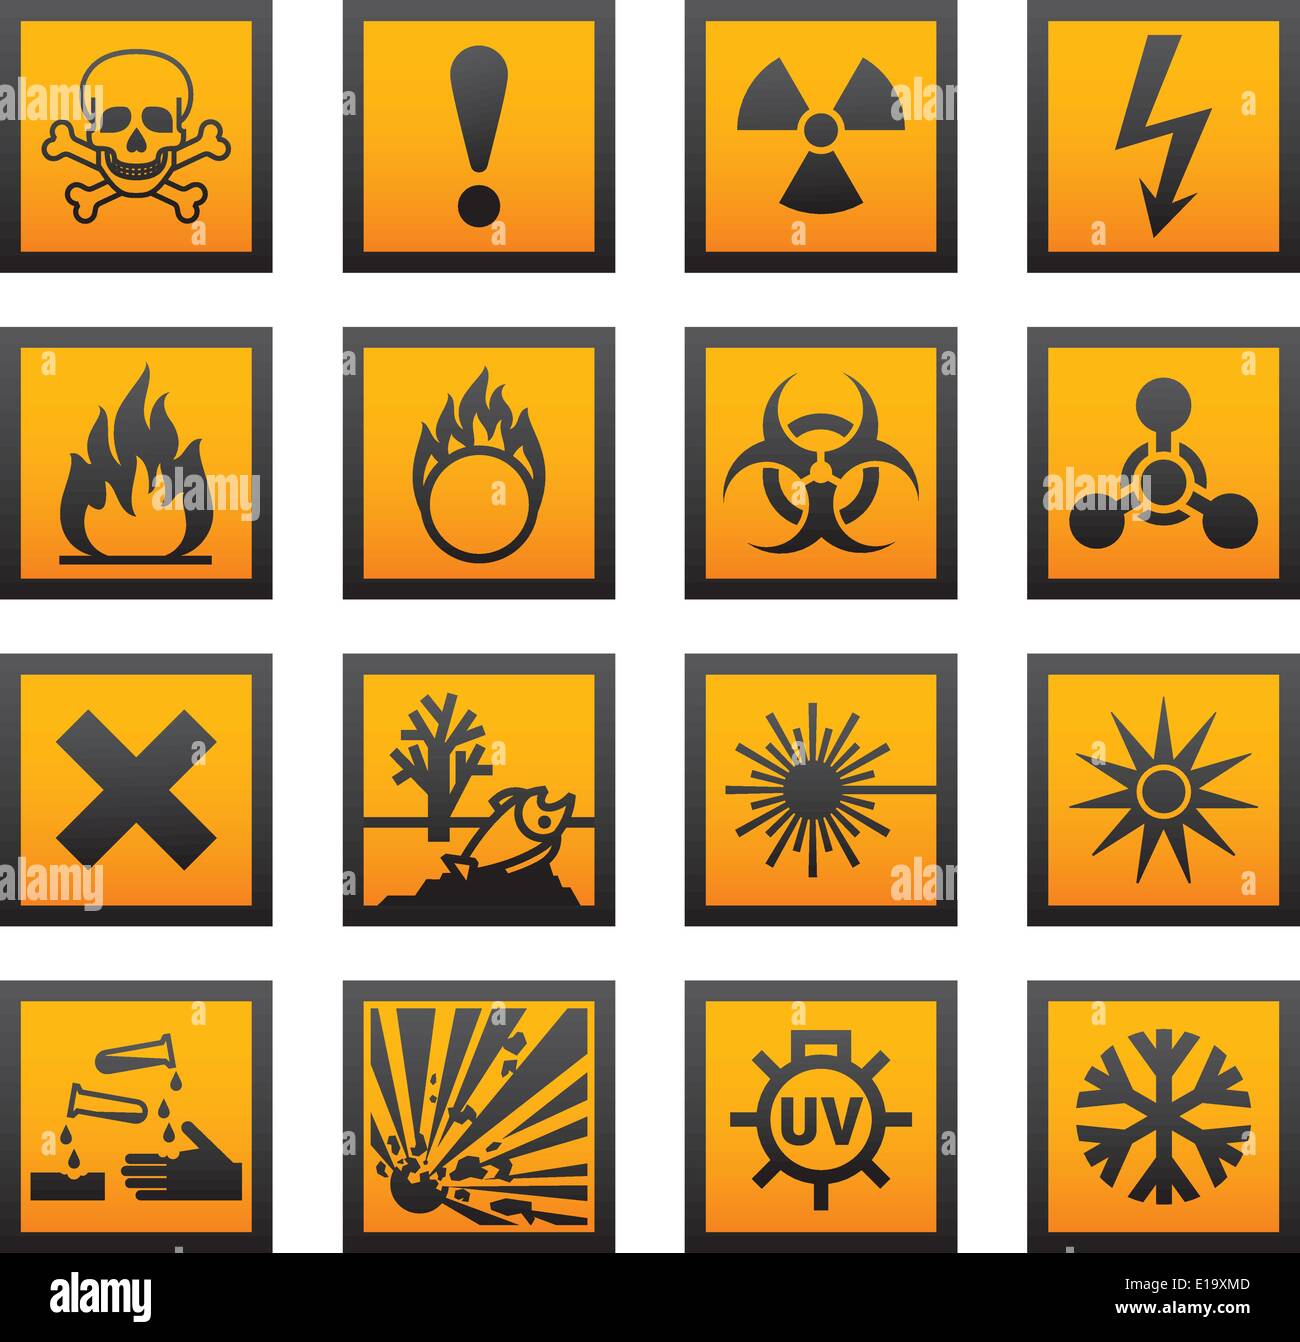 Hazard Symbols High Resolution Stock Photography And Images Alamy